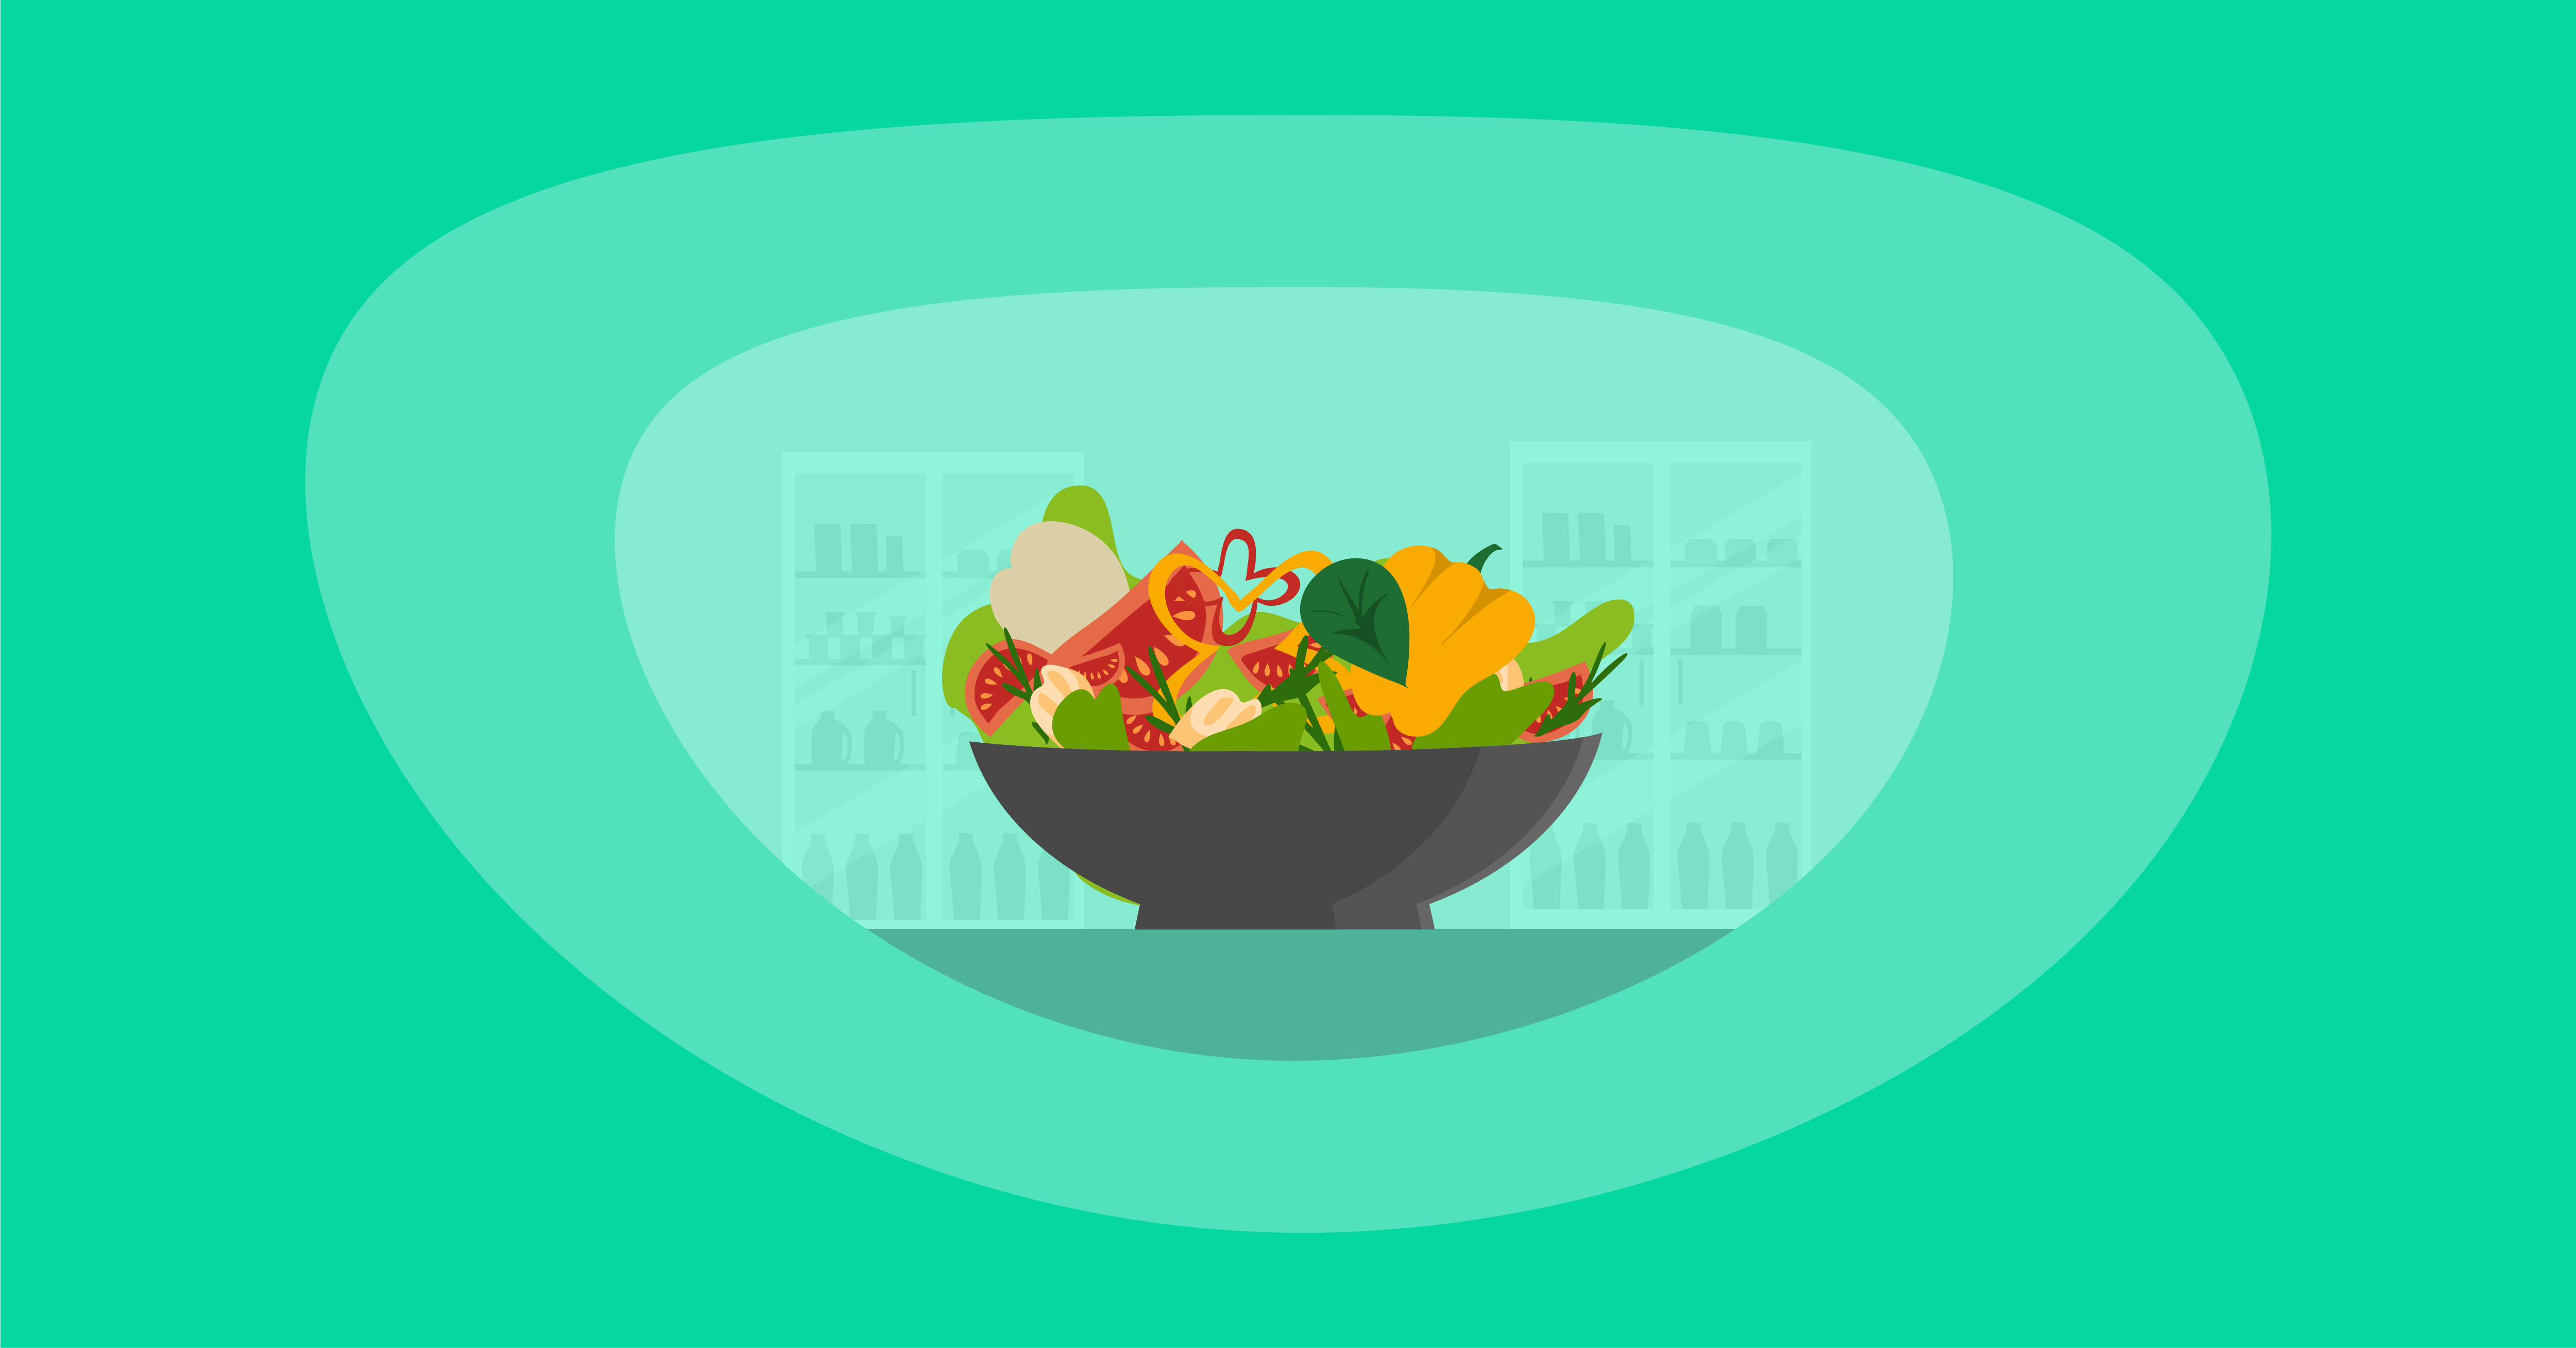 Illustration of a healthy-looking food bowl